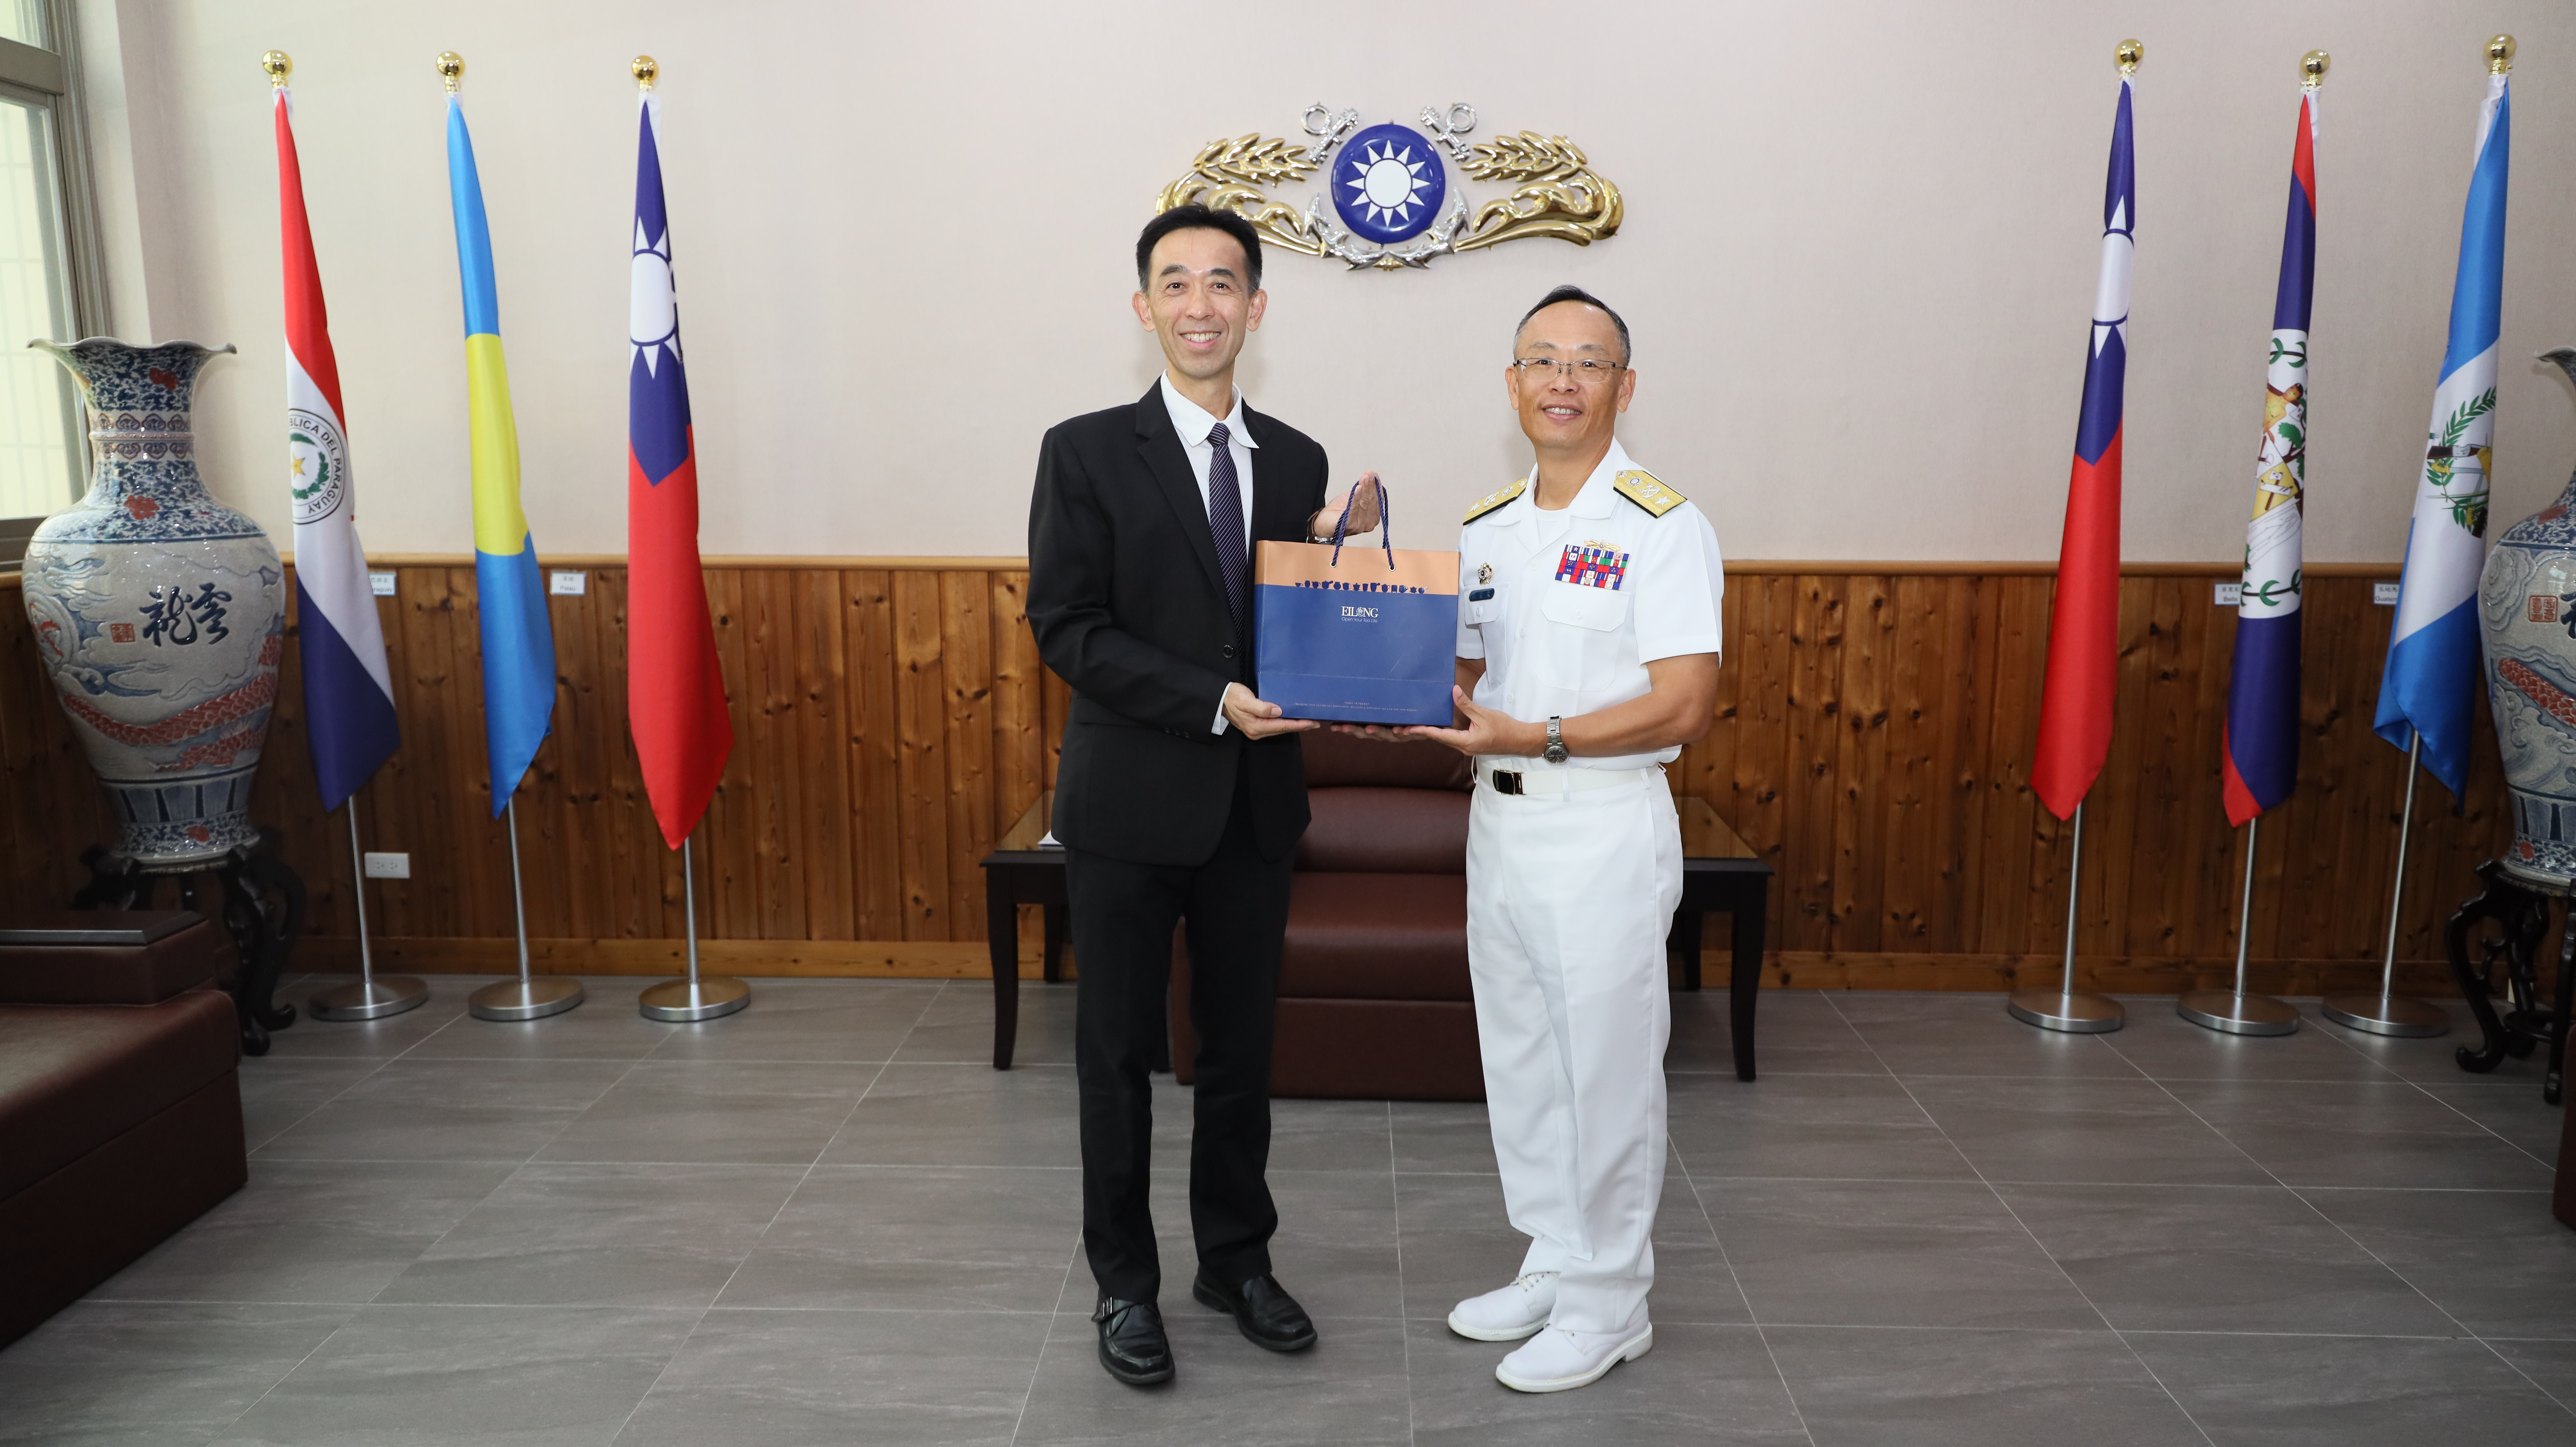 The General Education Center of R.O.C. Naval Academy (ROCNA) held a Series of Activities to Celebrate the 76th Anniversary